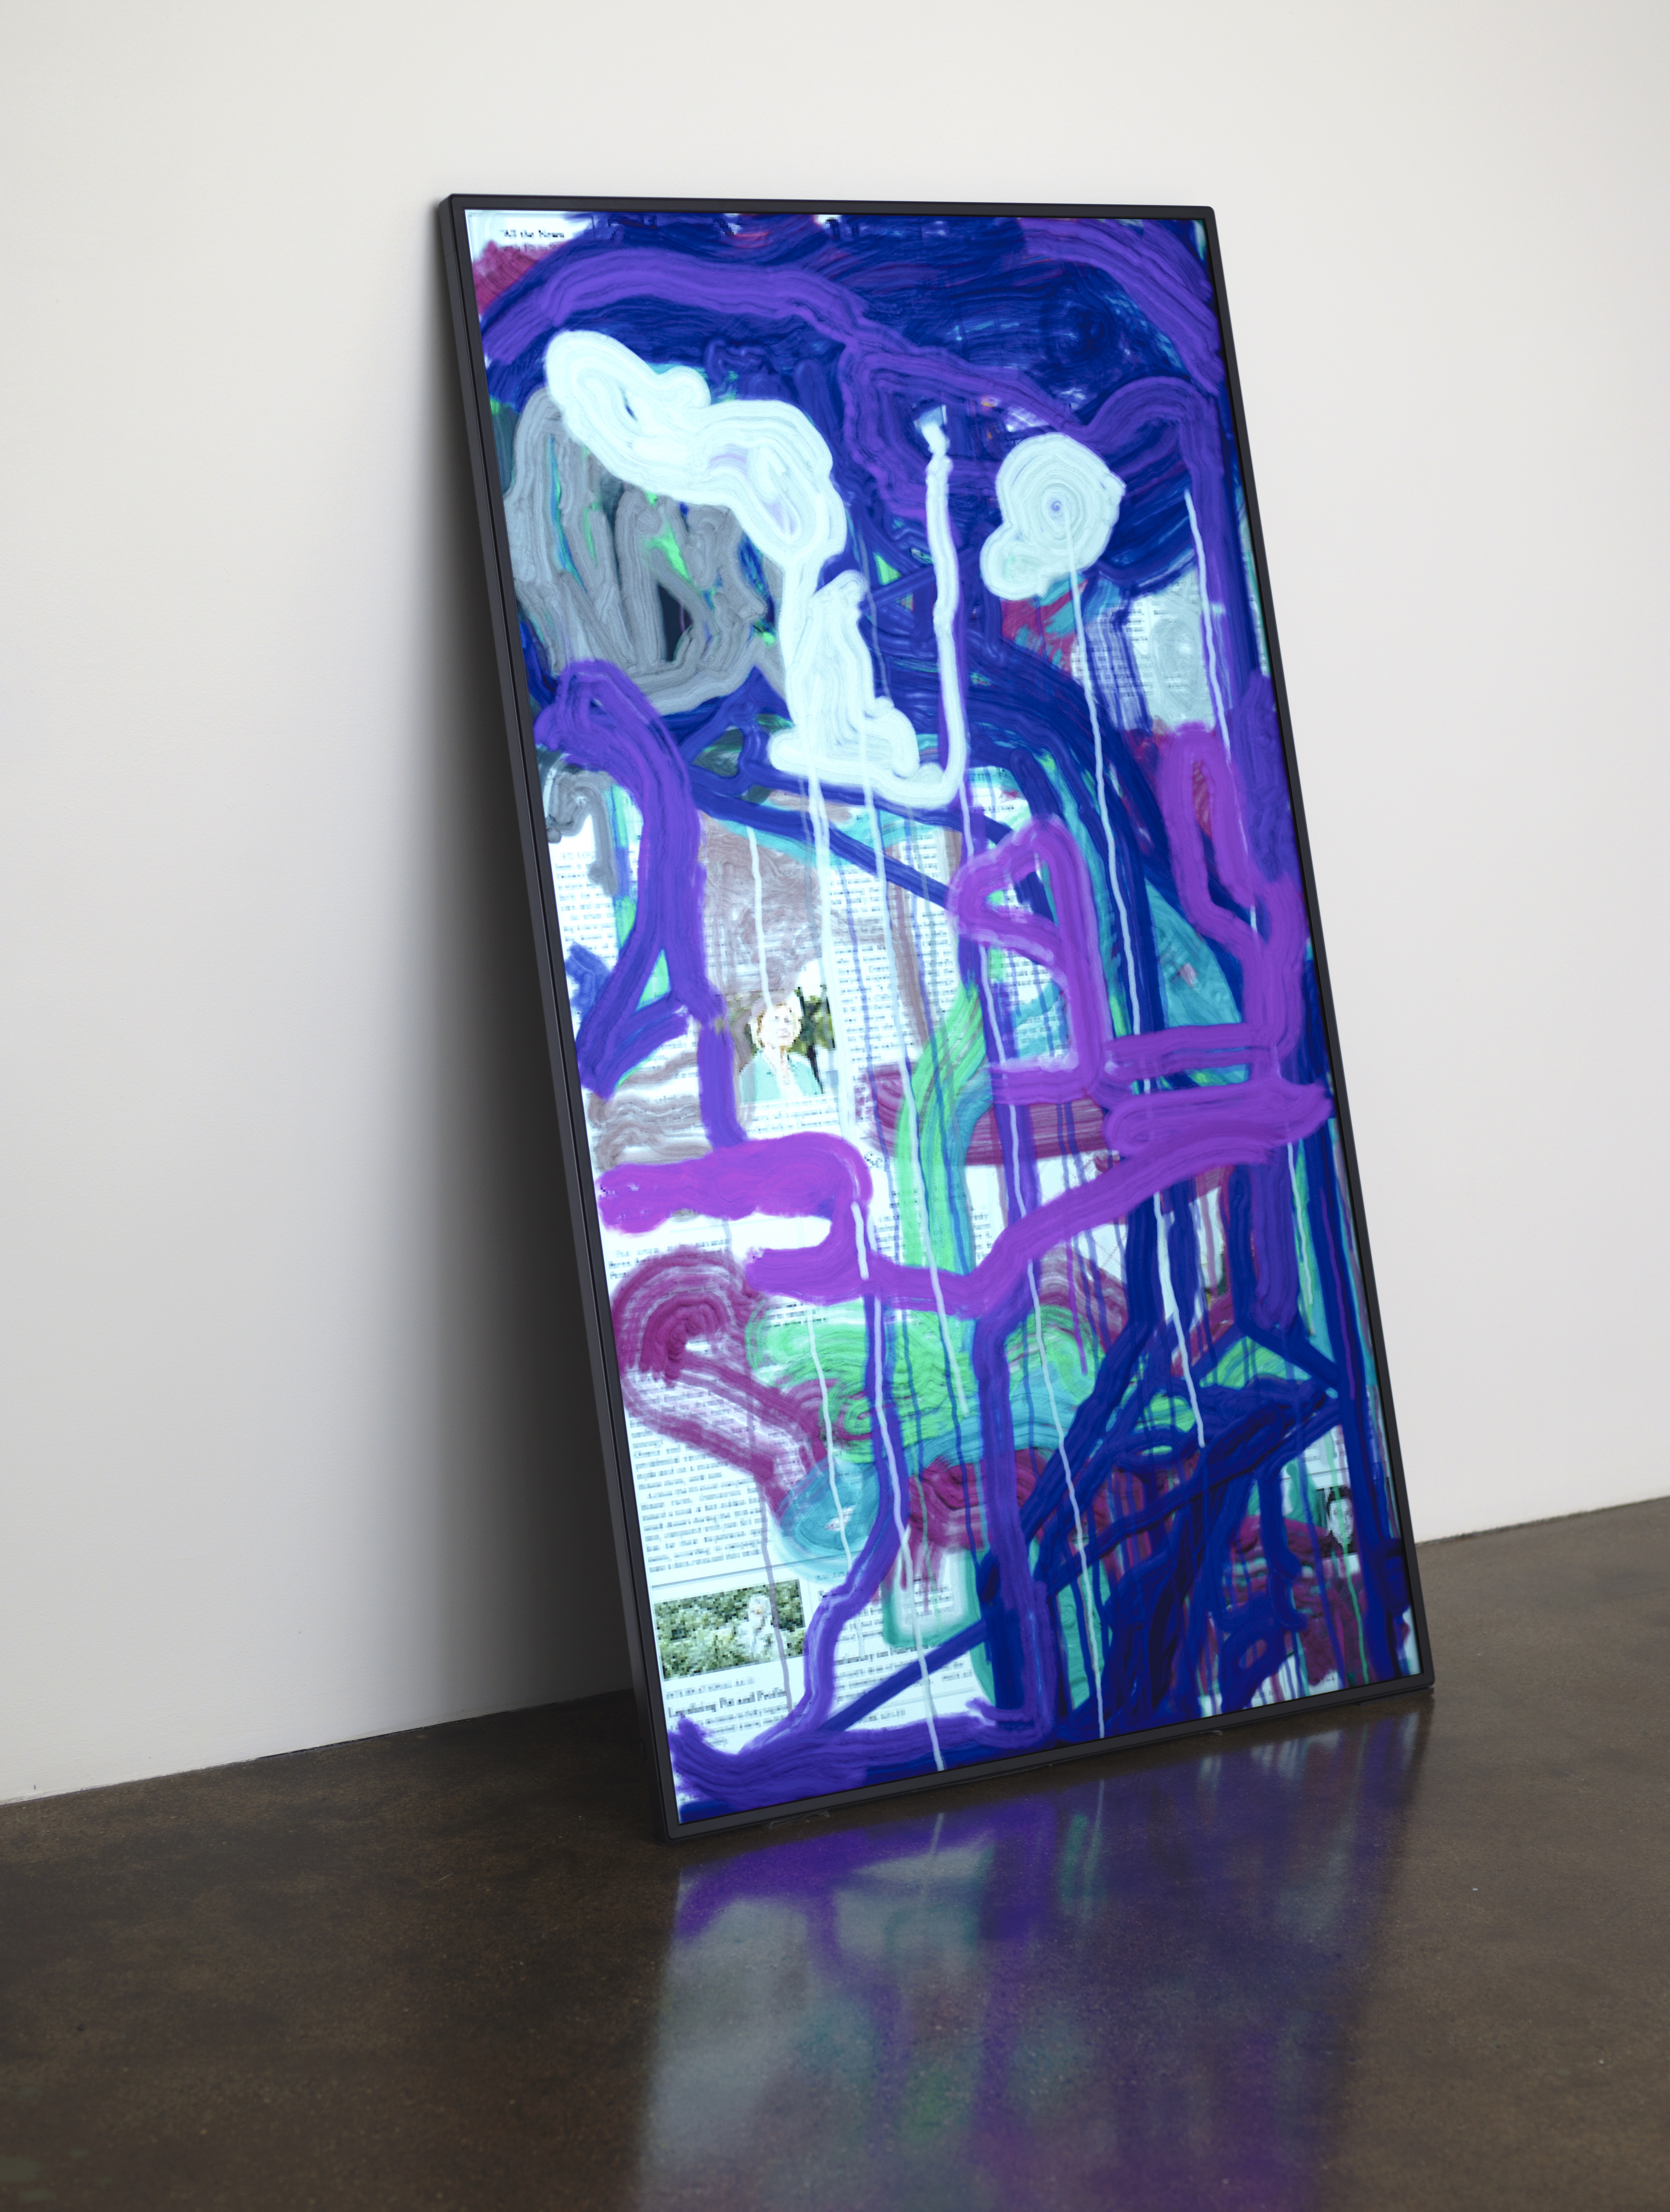 A monitor displays a software-based artwork in which the front page of The New York Times becomes the canvas for a digital painting in an abstract expressionist style.